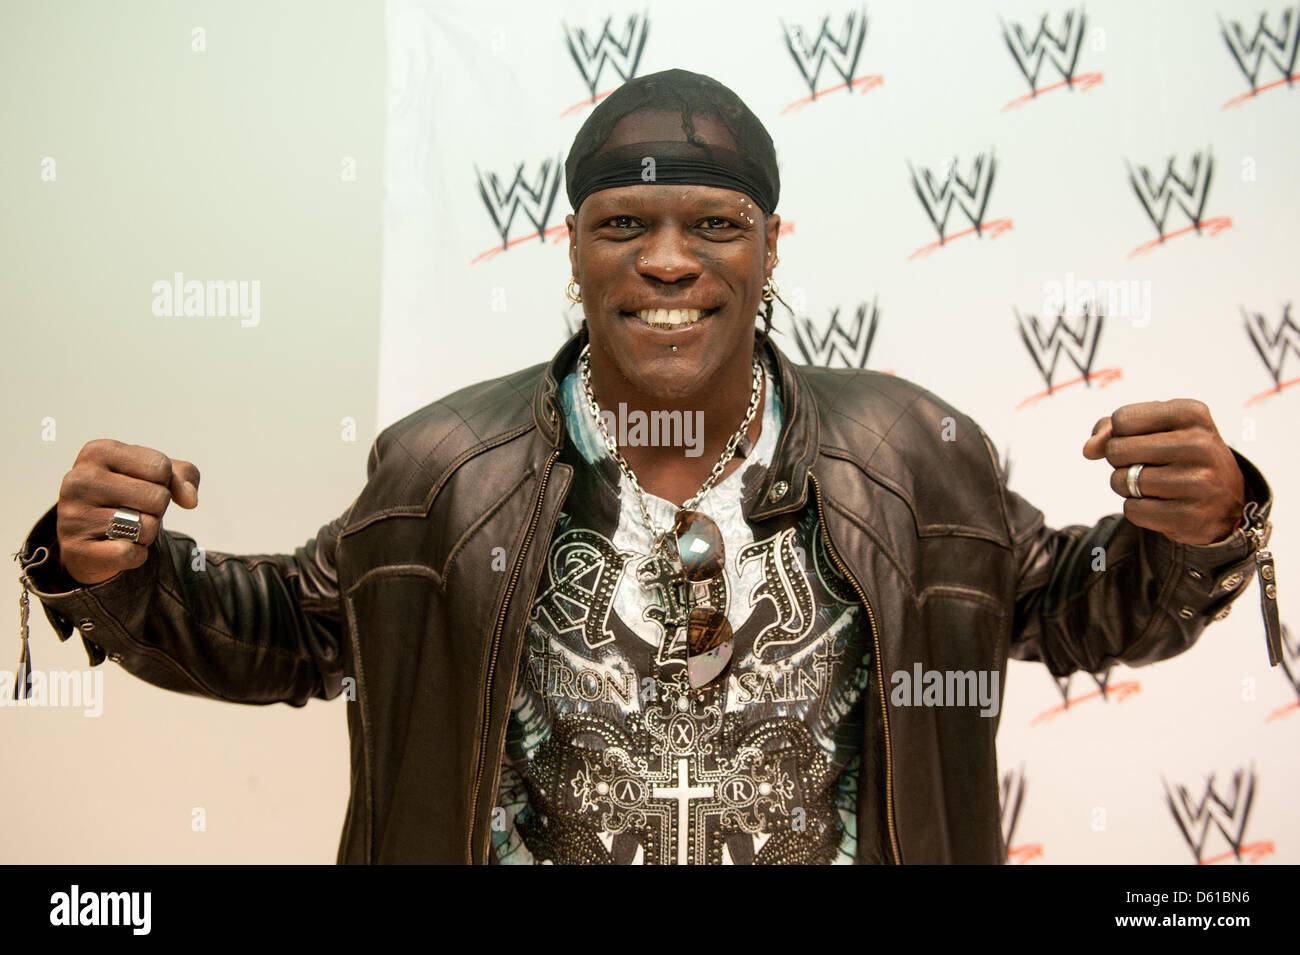 US-wrestler R-Truth cheers and poses during a press conference at the RAW WrestleMania Revenge Tour at the o2 World canue in Berlin, Germany, 14 April 2012. The WWE (World Wrestling Entertainment) celebrates its 20th German anniversary this April. The first show in Germany was staged in Kiel, Germany, in April 1992. Photo: Sebastian Kahnert Stock Photo